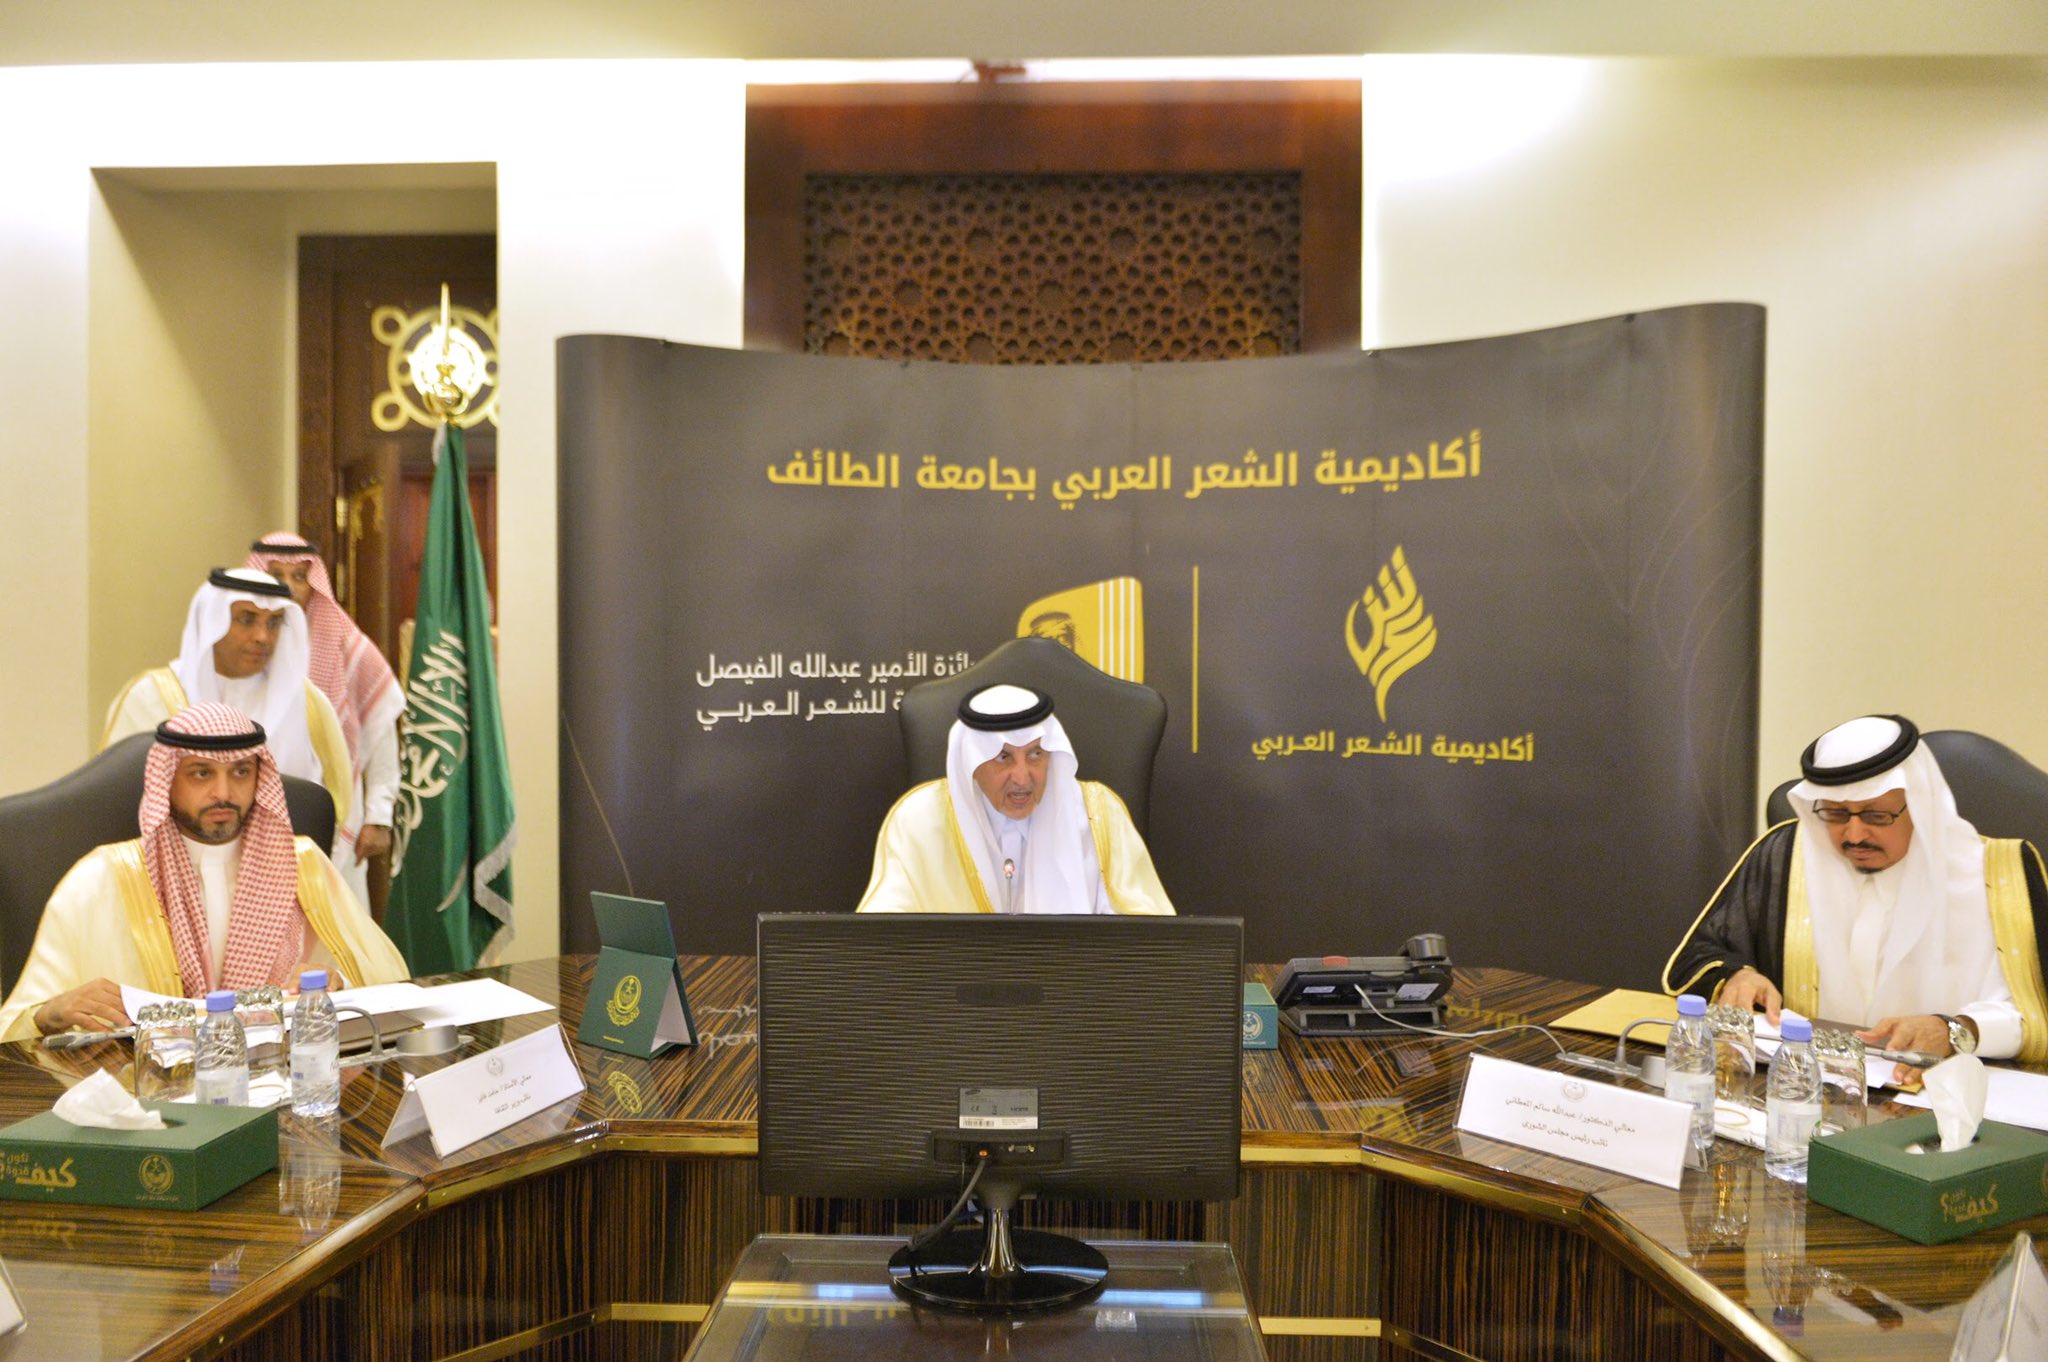 The Governor of Makkah Region agrees to holding the Abdullah Al-Faisal Award Ceremony at the beginning of next Muharram